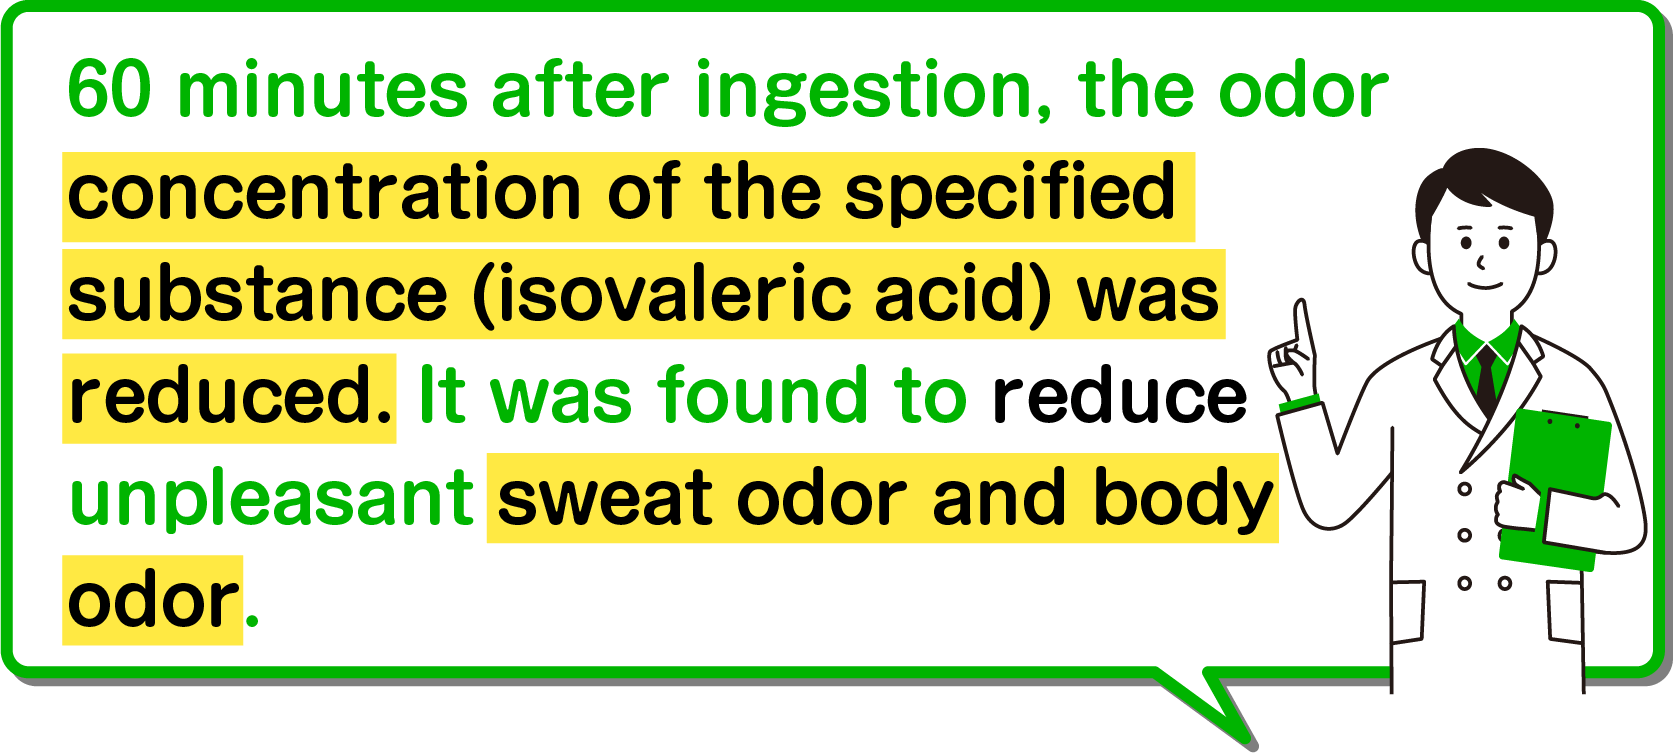 60 minutes after ingestion, the odor concentration of the specified substance (isovaleric acid) was reduced. It was found to reduce unpleasant sweat odor and body odor.